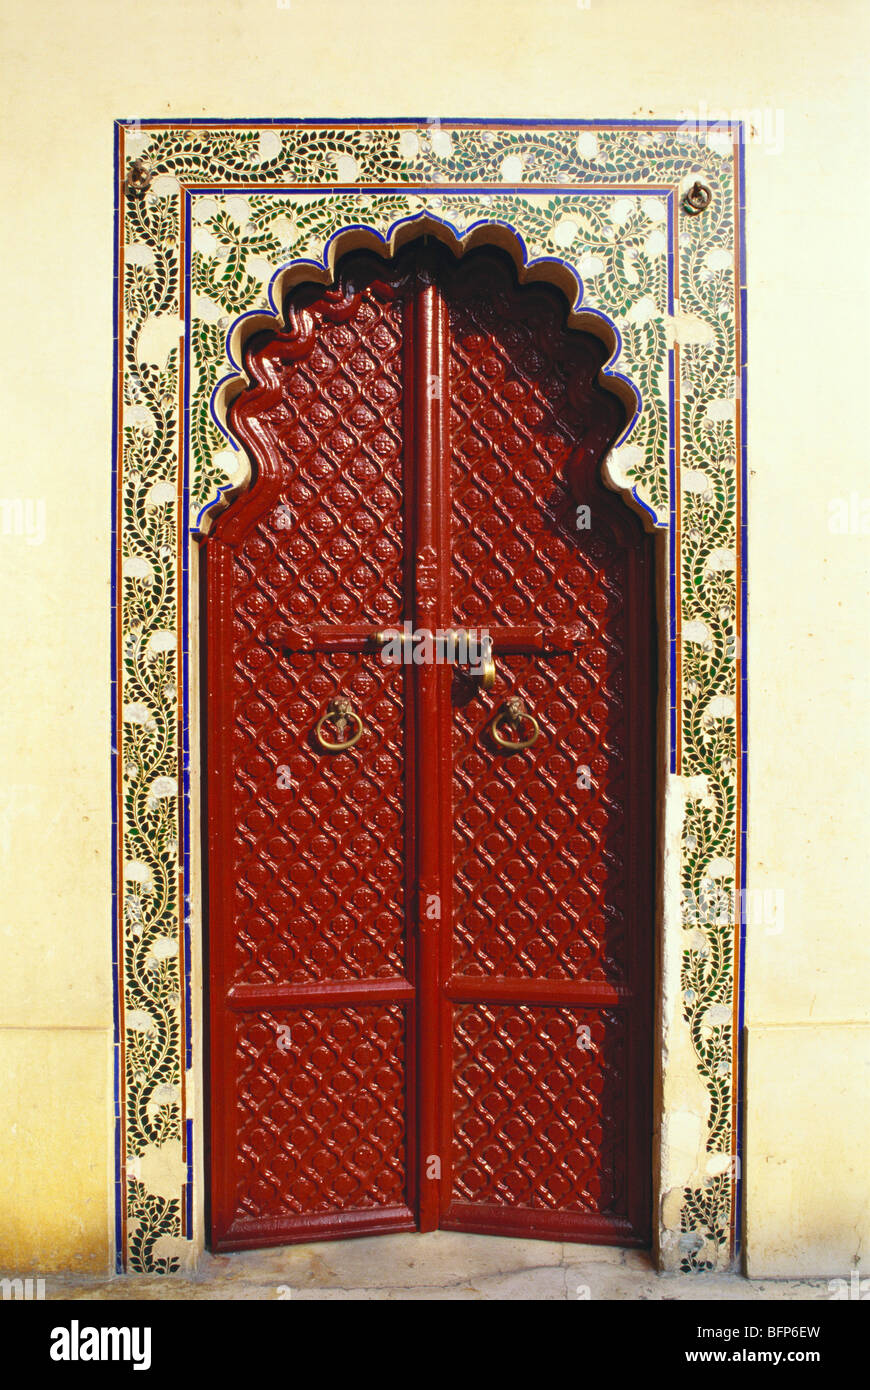 AAD 66352 : Closed door in More Chowk in City palace ; Udaipur ; Rajasthan ; India Stock Photo